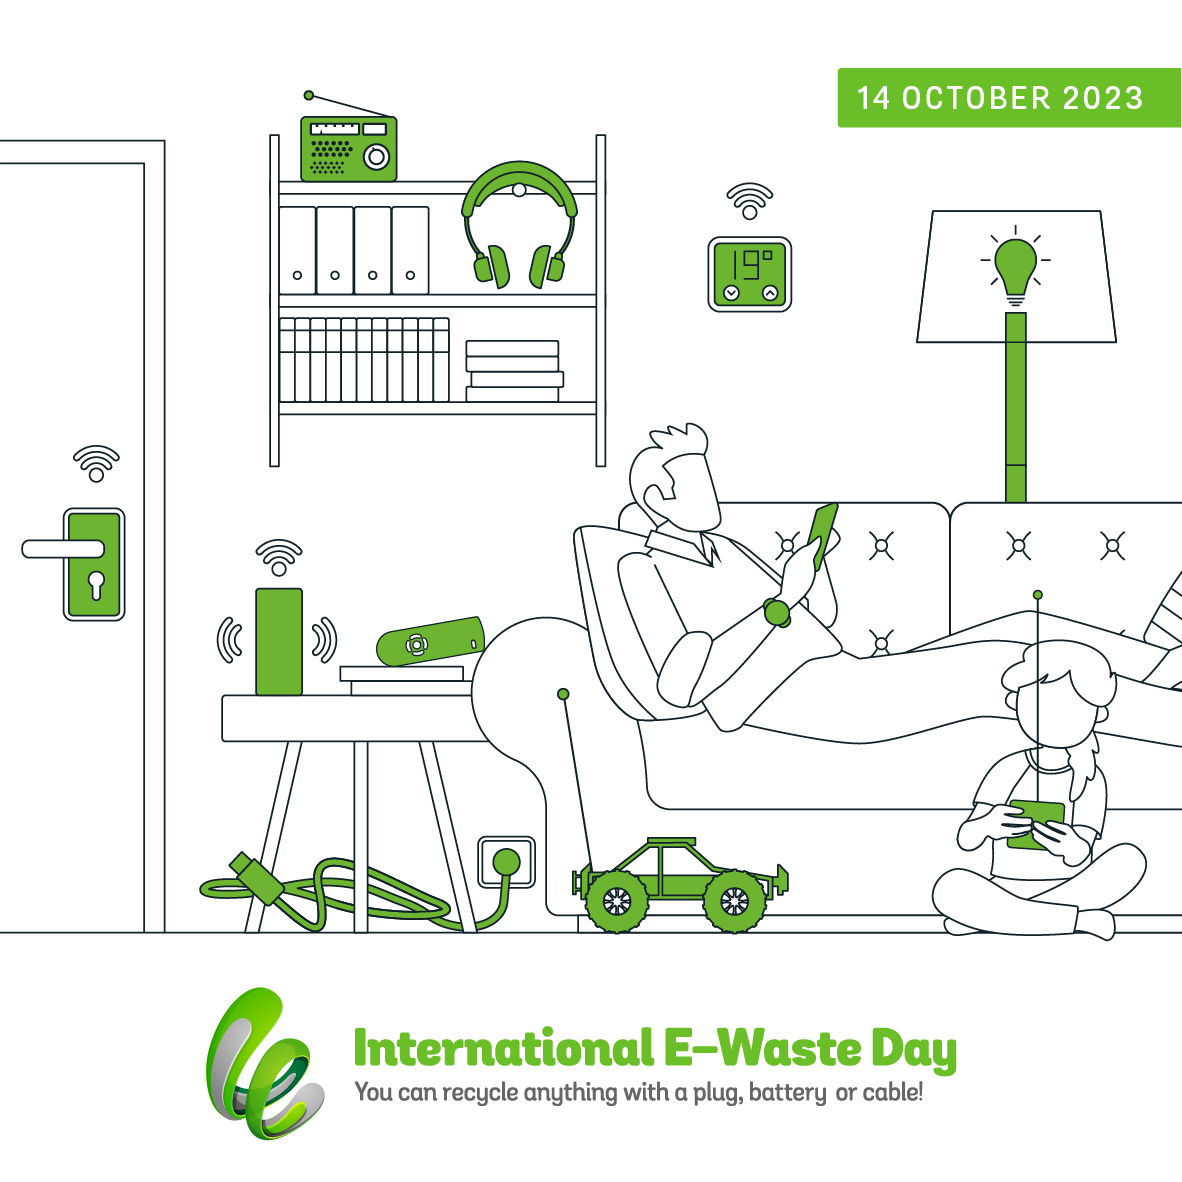 A poster promoting what electronic products can be recycled for e-waste day on 14 October